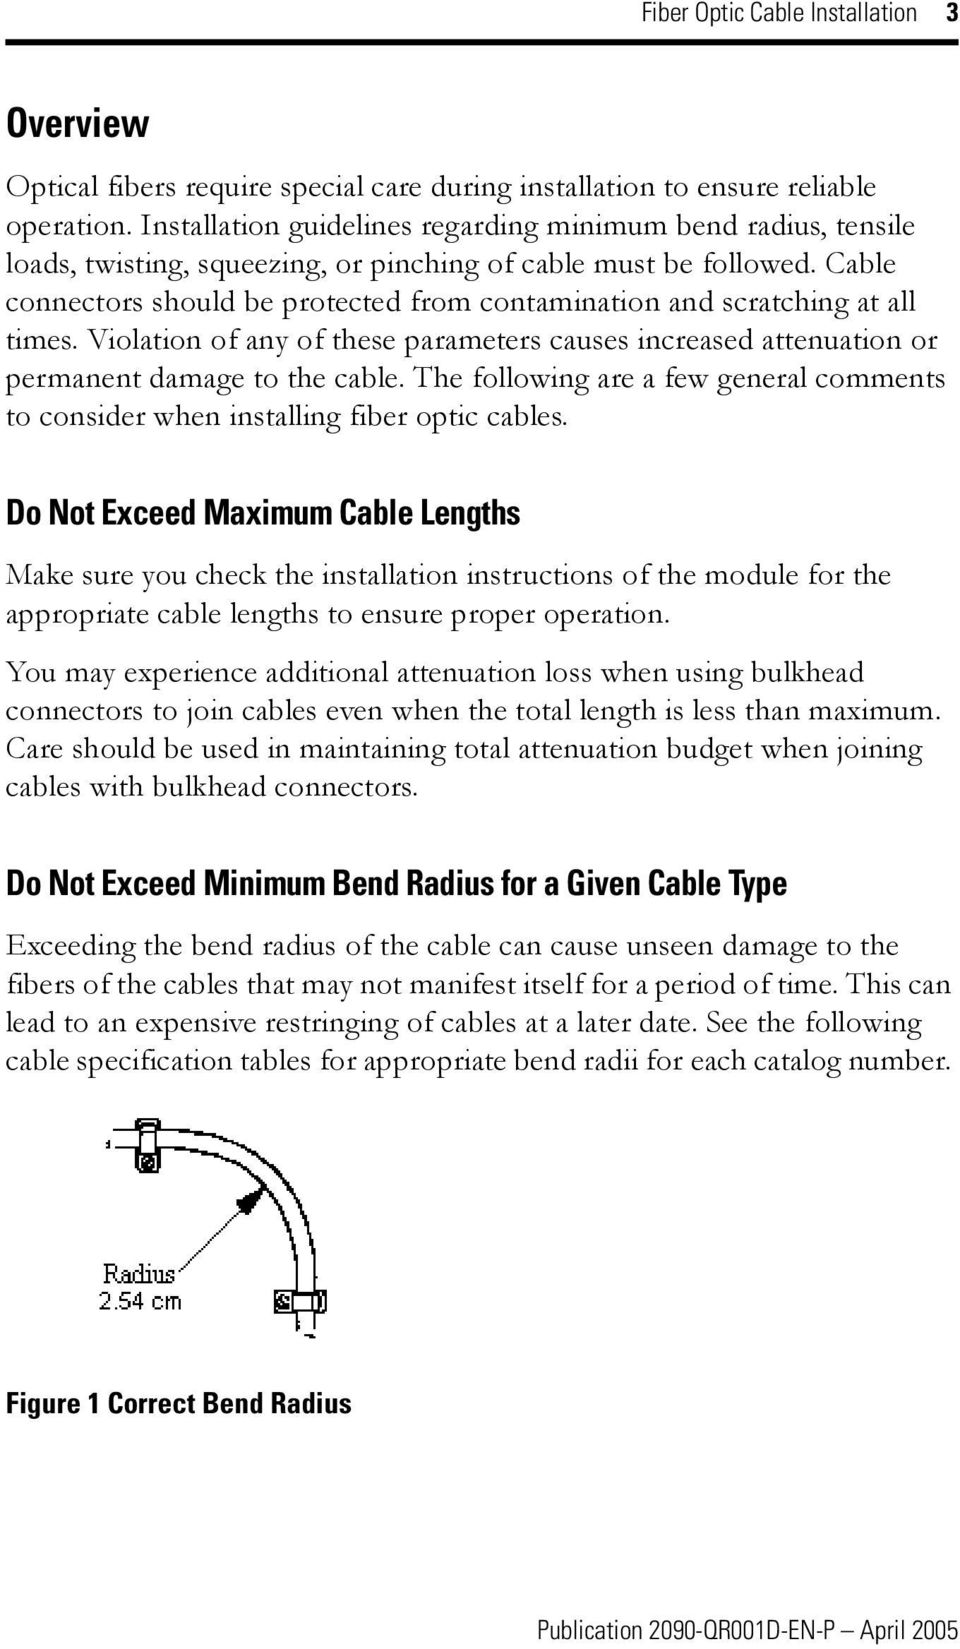 Cable connectors should be protected from contamination and scratching at all times. Violation of any of these parameters causes increased attenuation or permanent damage to the cable.